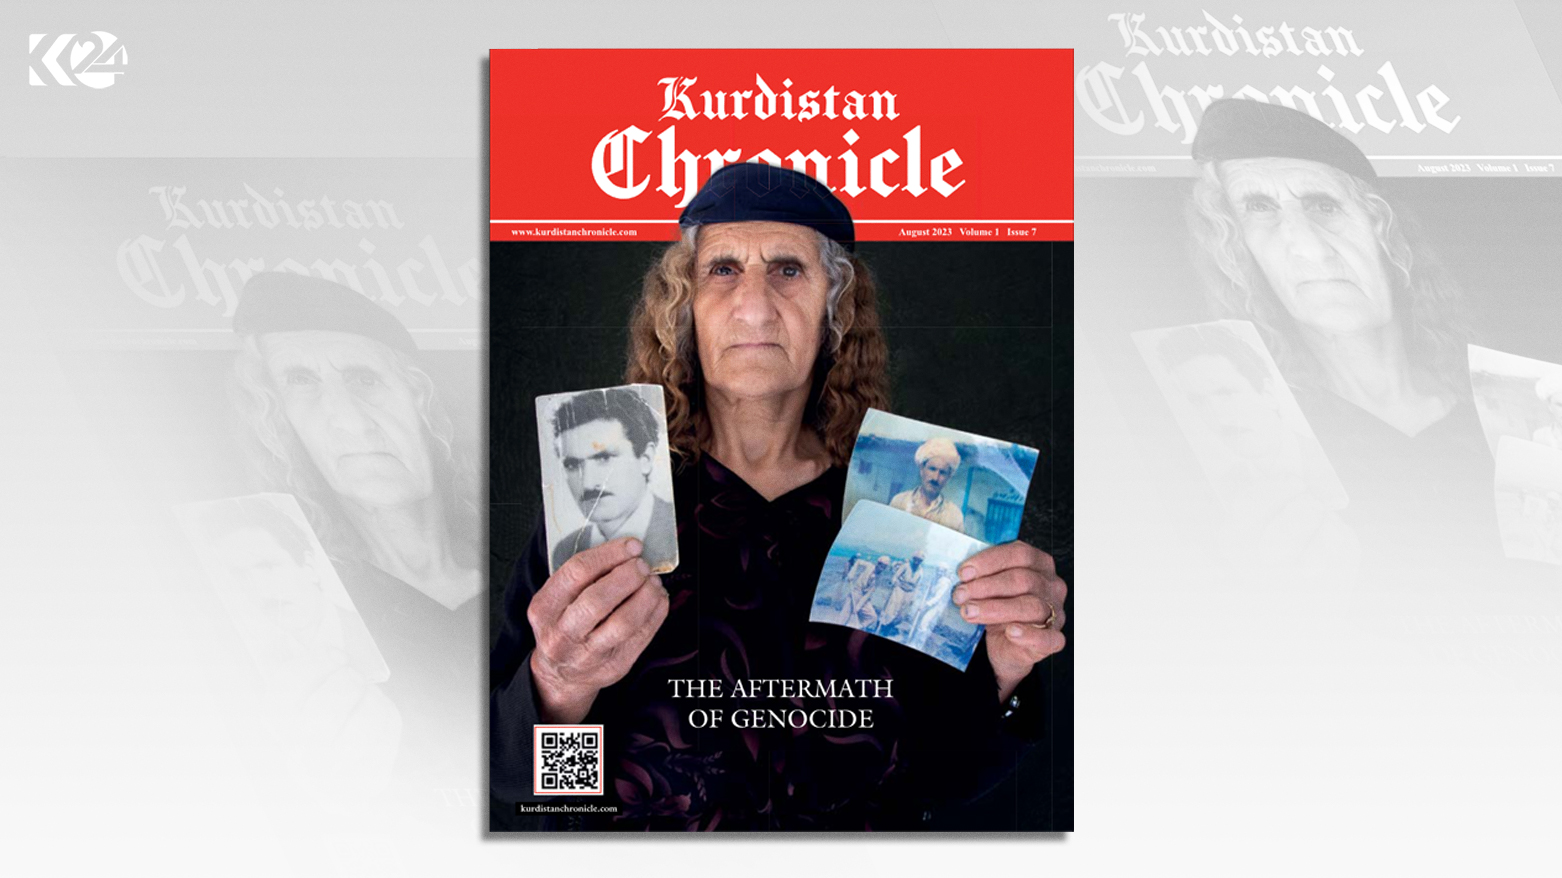 The cover of the 7th edition showcases an elderly woman who is a victim of the Anfal genocide. (Photo: Kurdistan Chronicle)